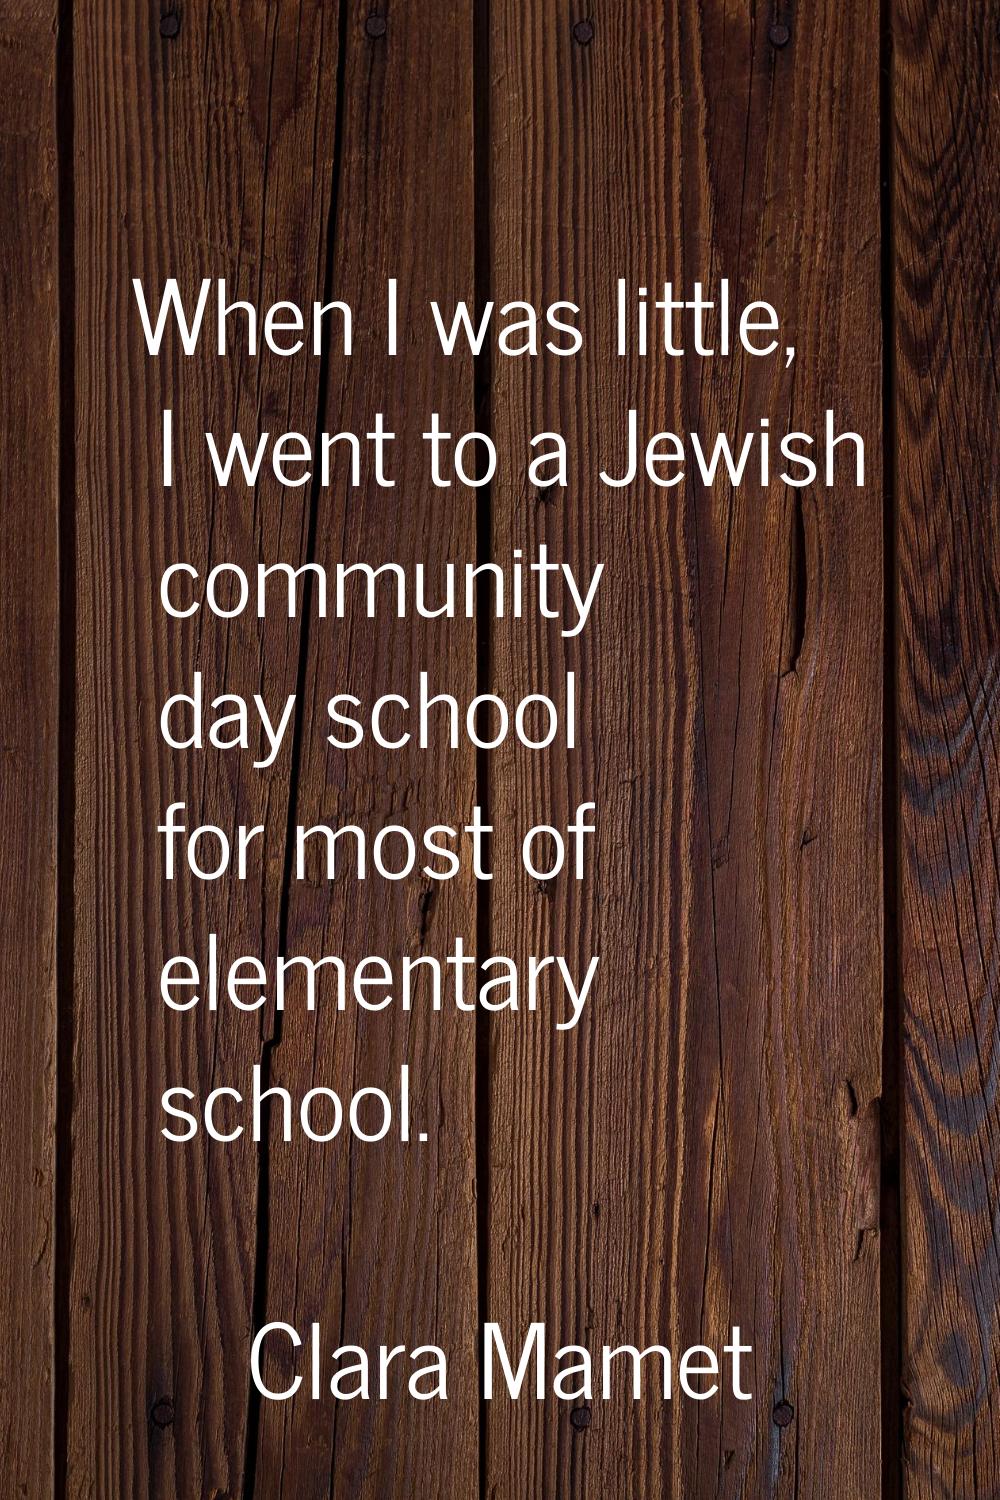 When I was little, I went to a Jewish community day school for most of elementary school.